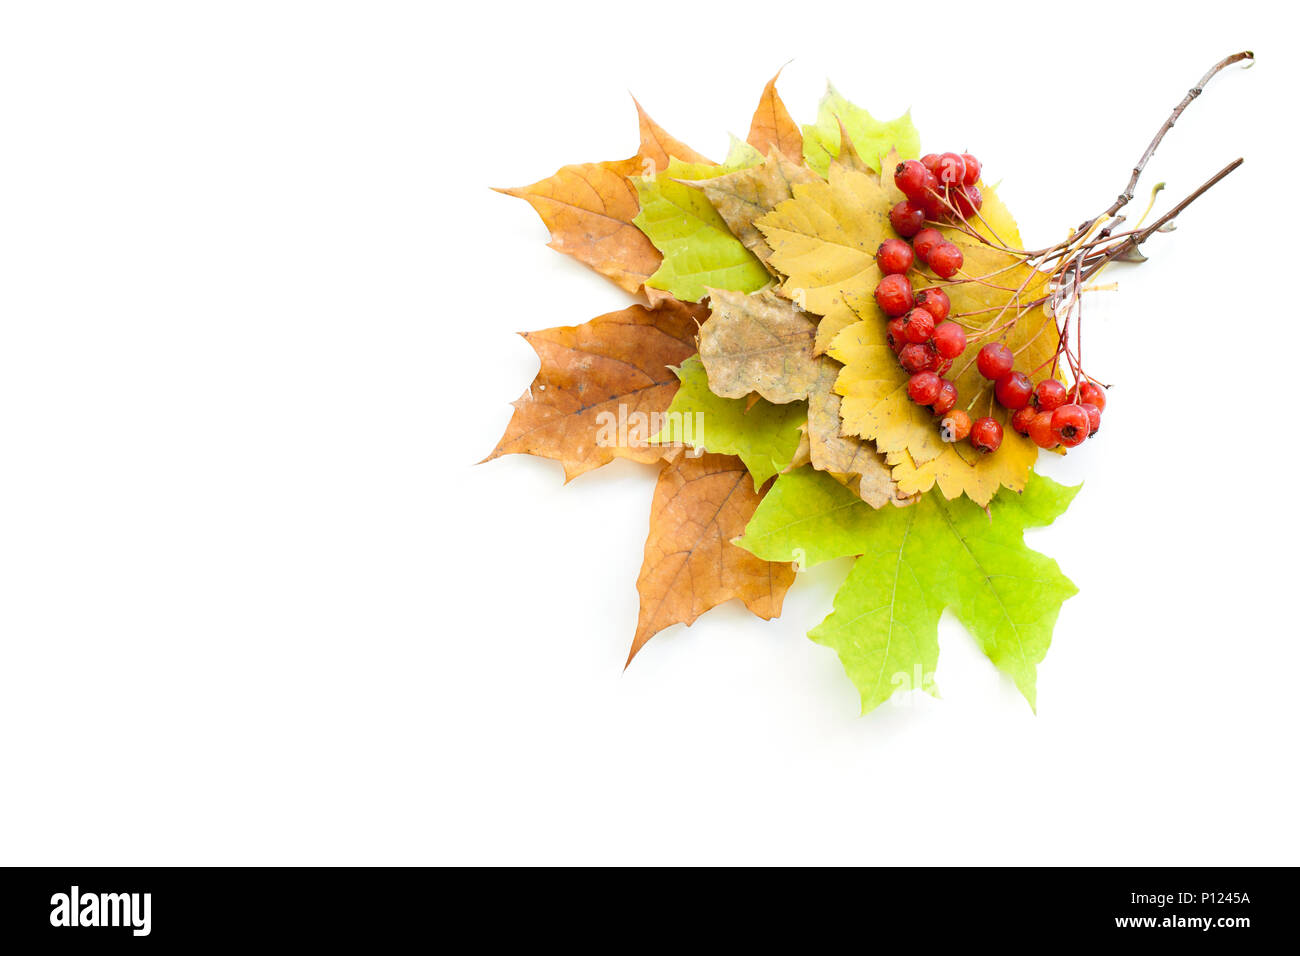 Colorful autumn leaves and red ripe hawthorn berries on white background. Stock Photo